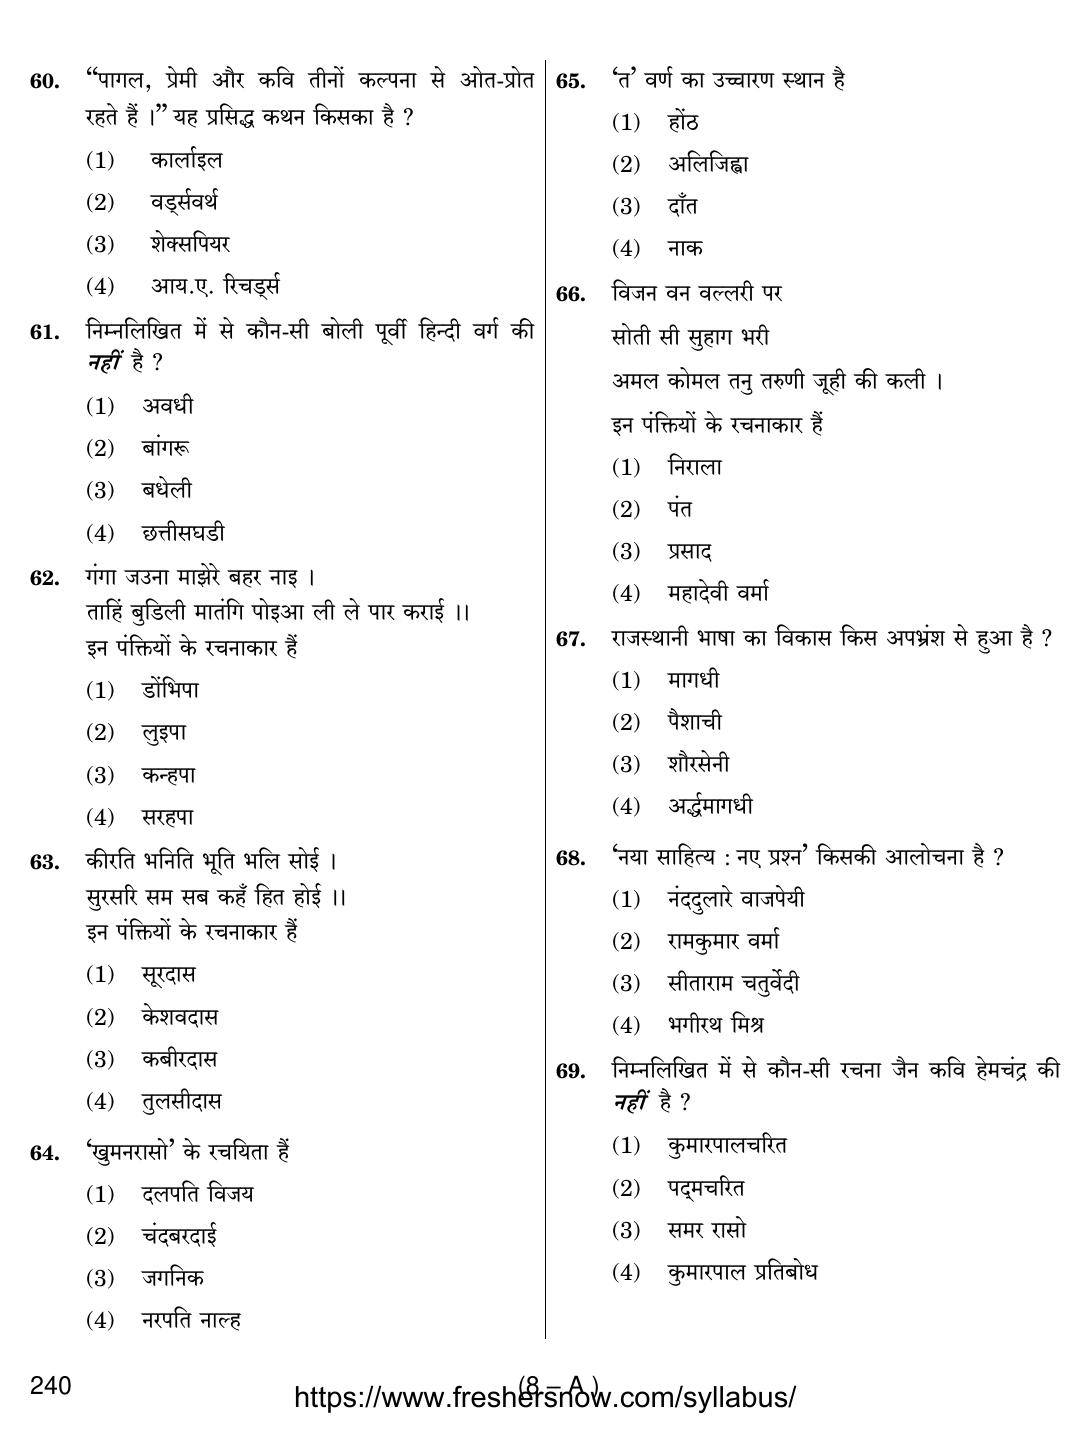 Punjab B.Ed Question Papers for Hindi Language - Page 8